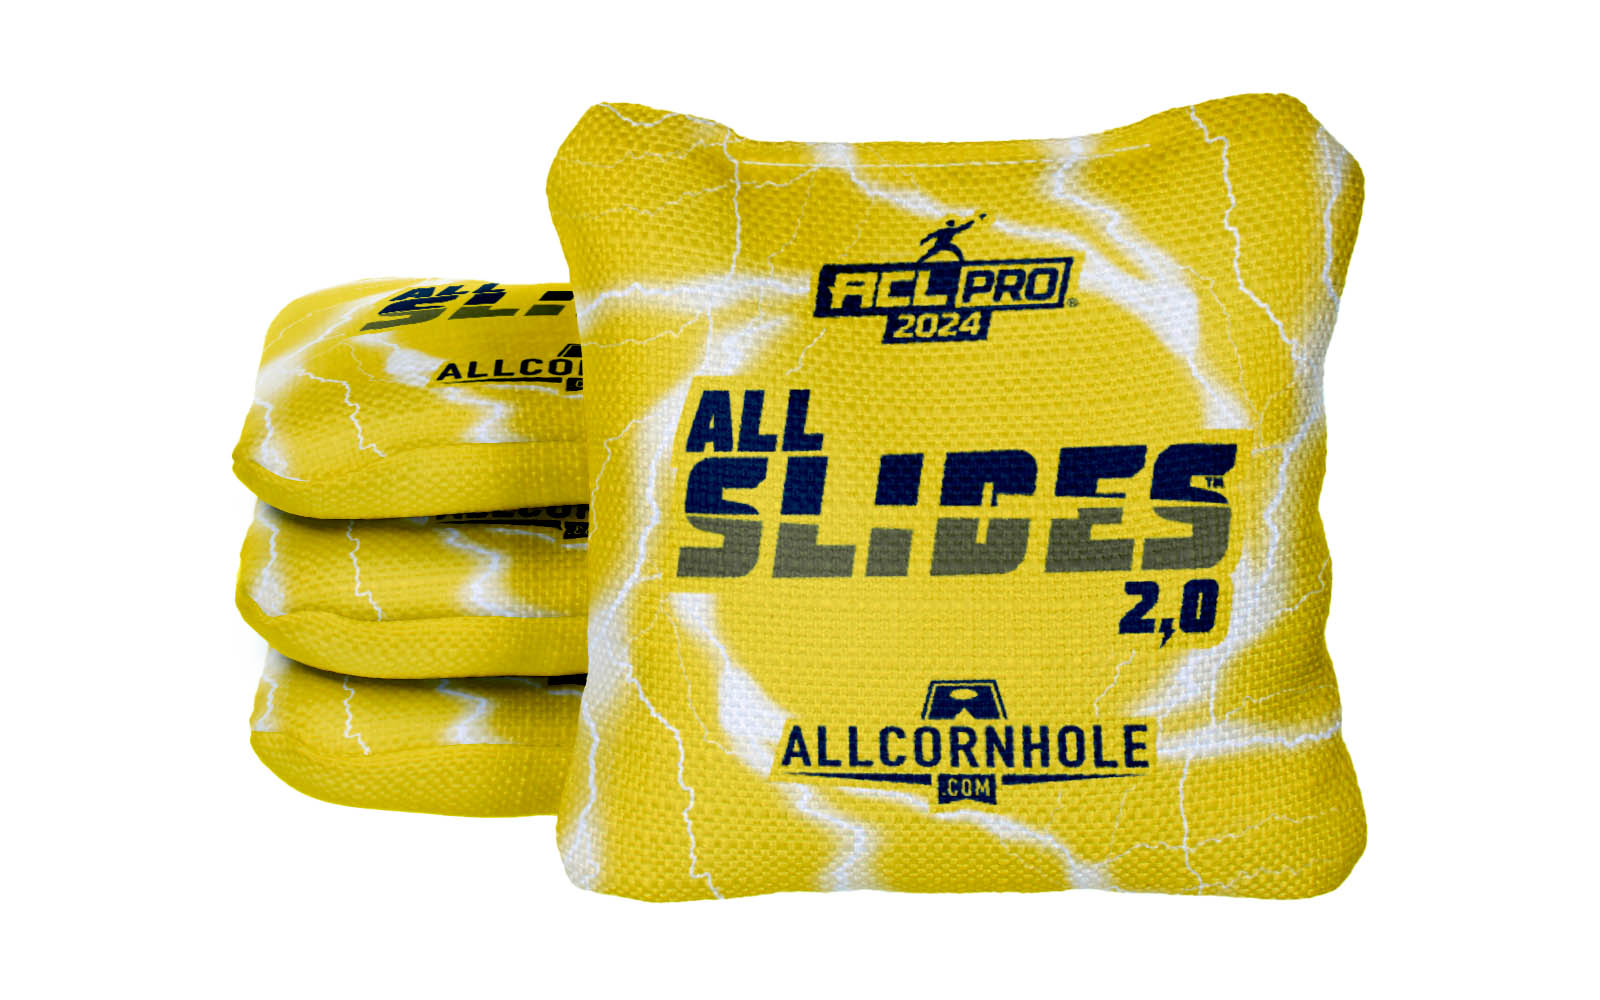 Officially Licensed Collegiate Cornhole Bags - All-Slide 2.0 - Set of 4 - University of Michigan